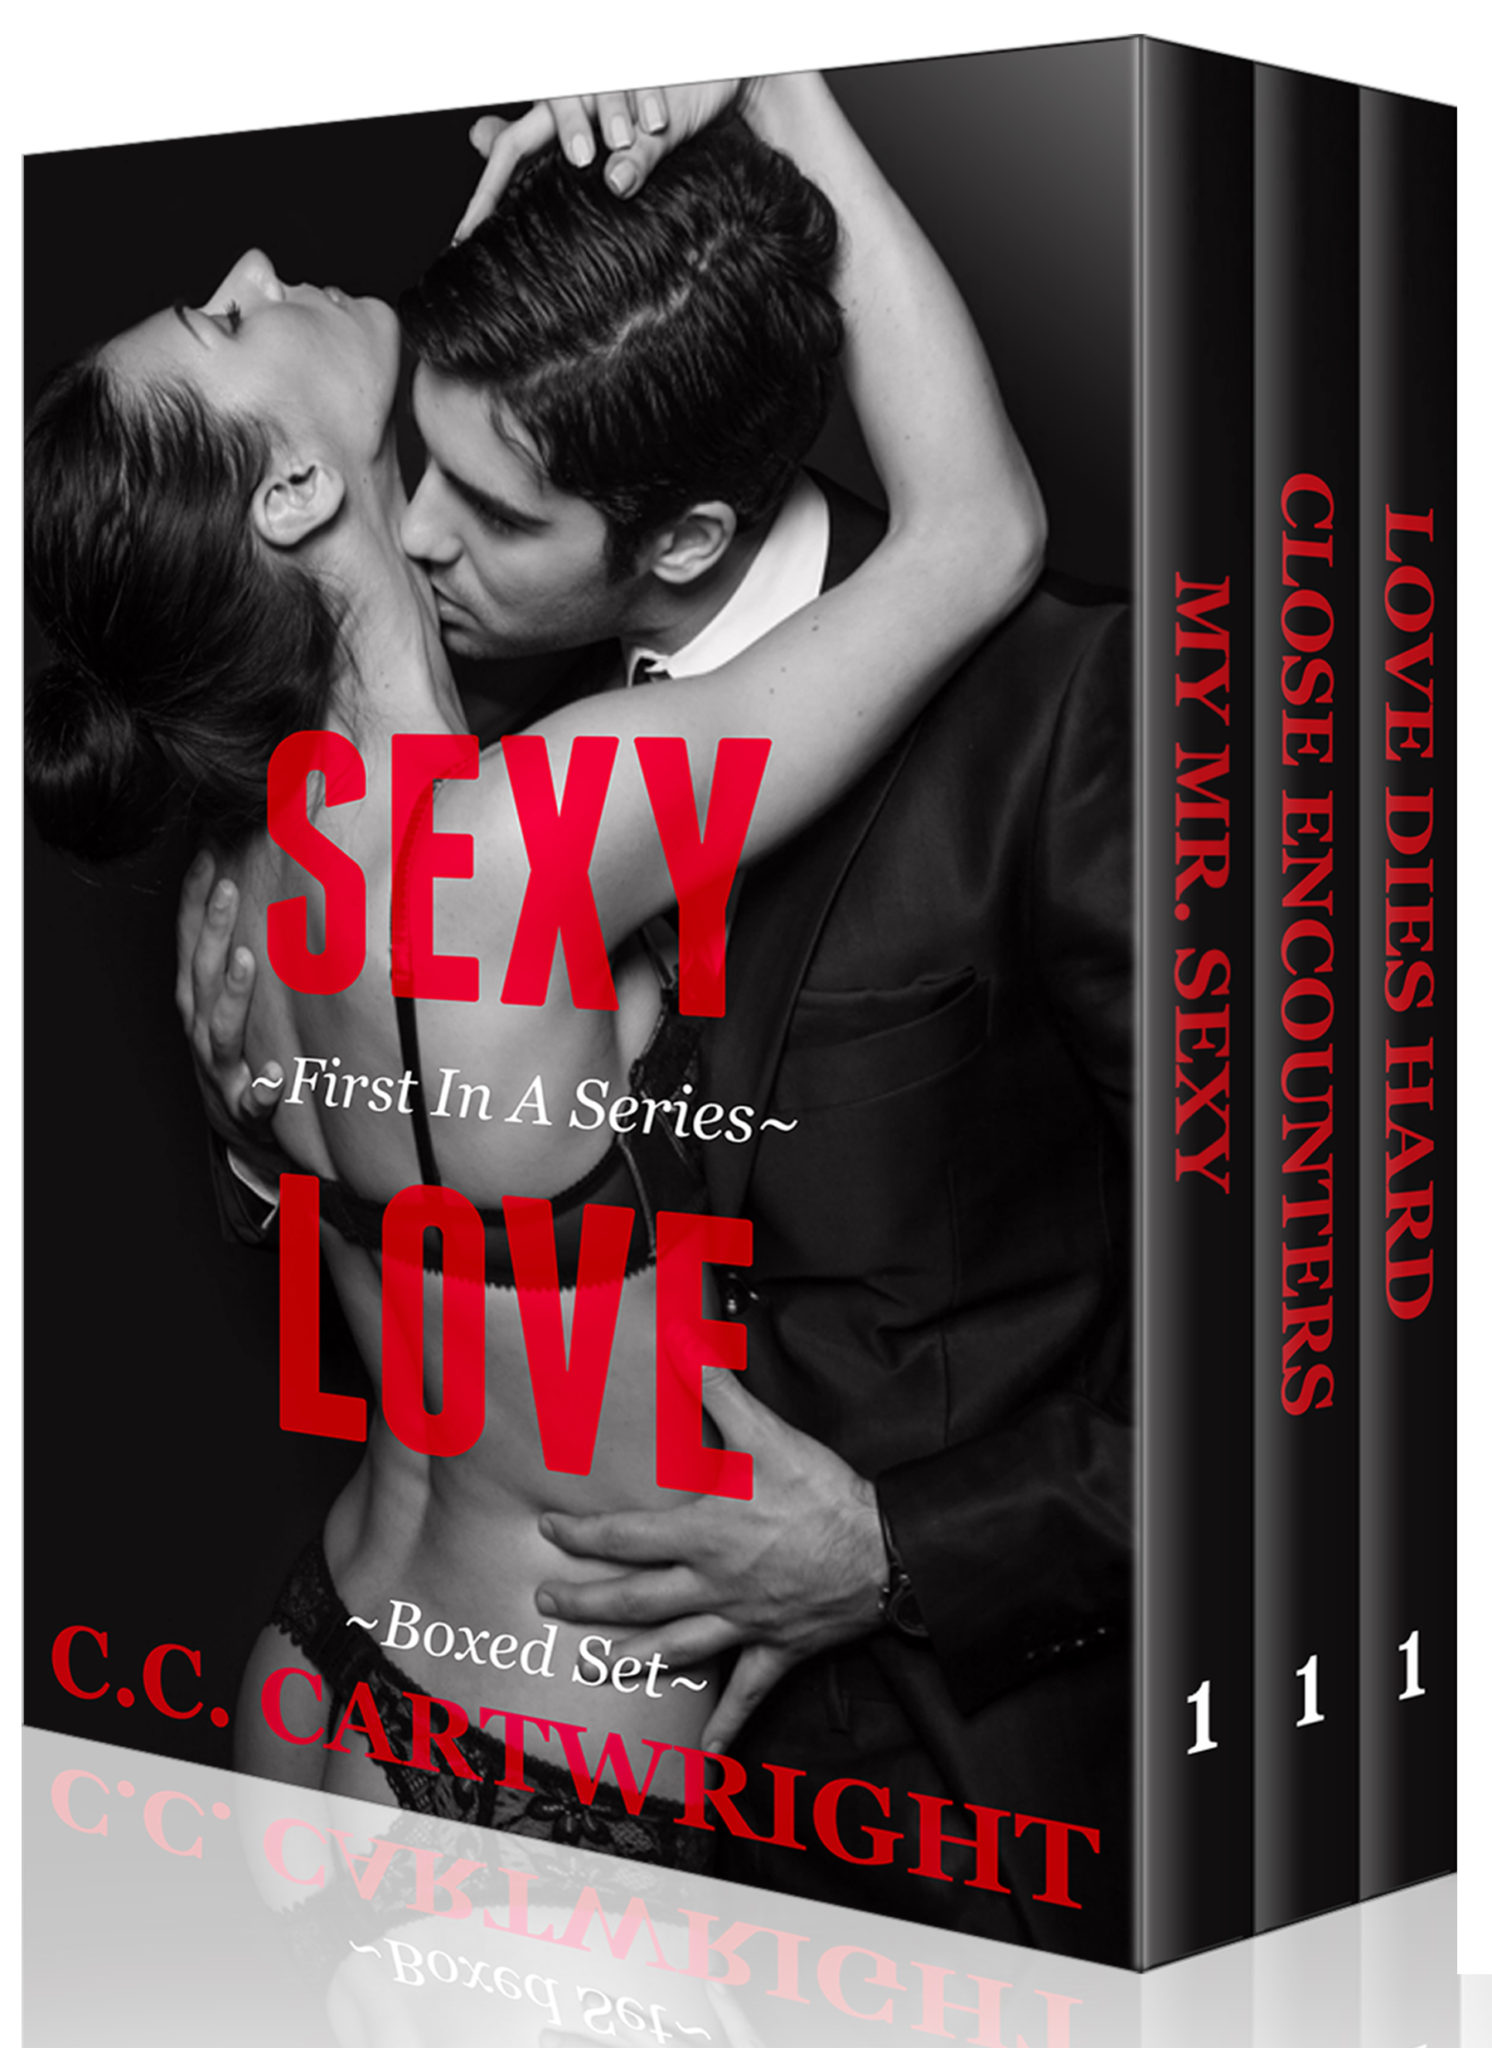 FREE: SEXY LOVE BOXED SET by C.C. Cartwright